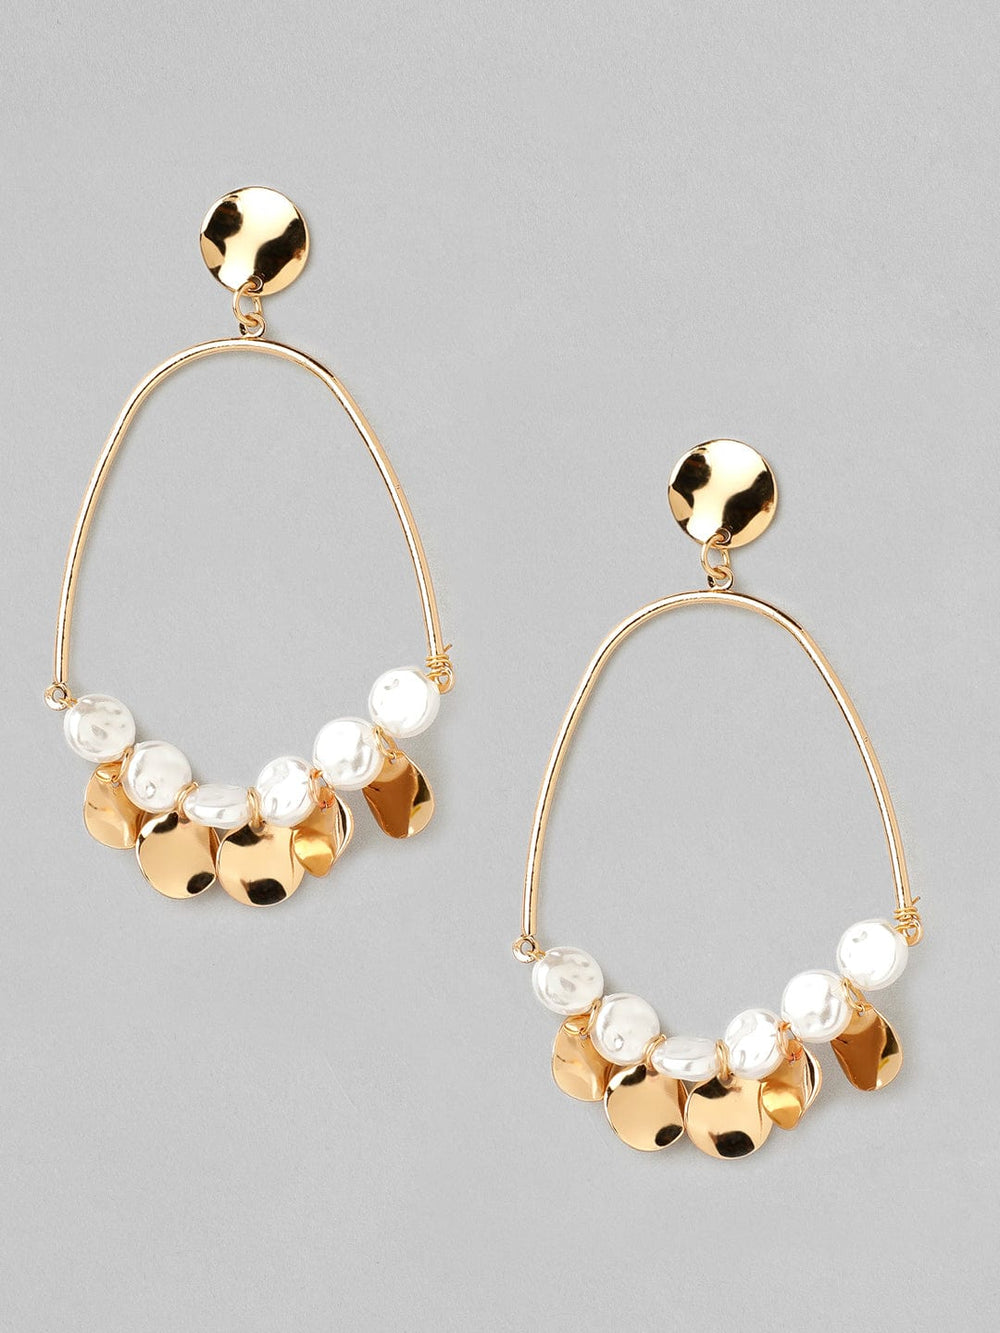 Rubans Gold-Plated White Classic Handcrafted Drop Earrings Earrings